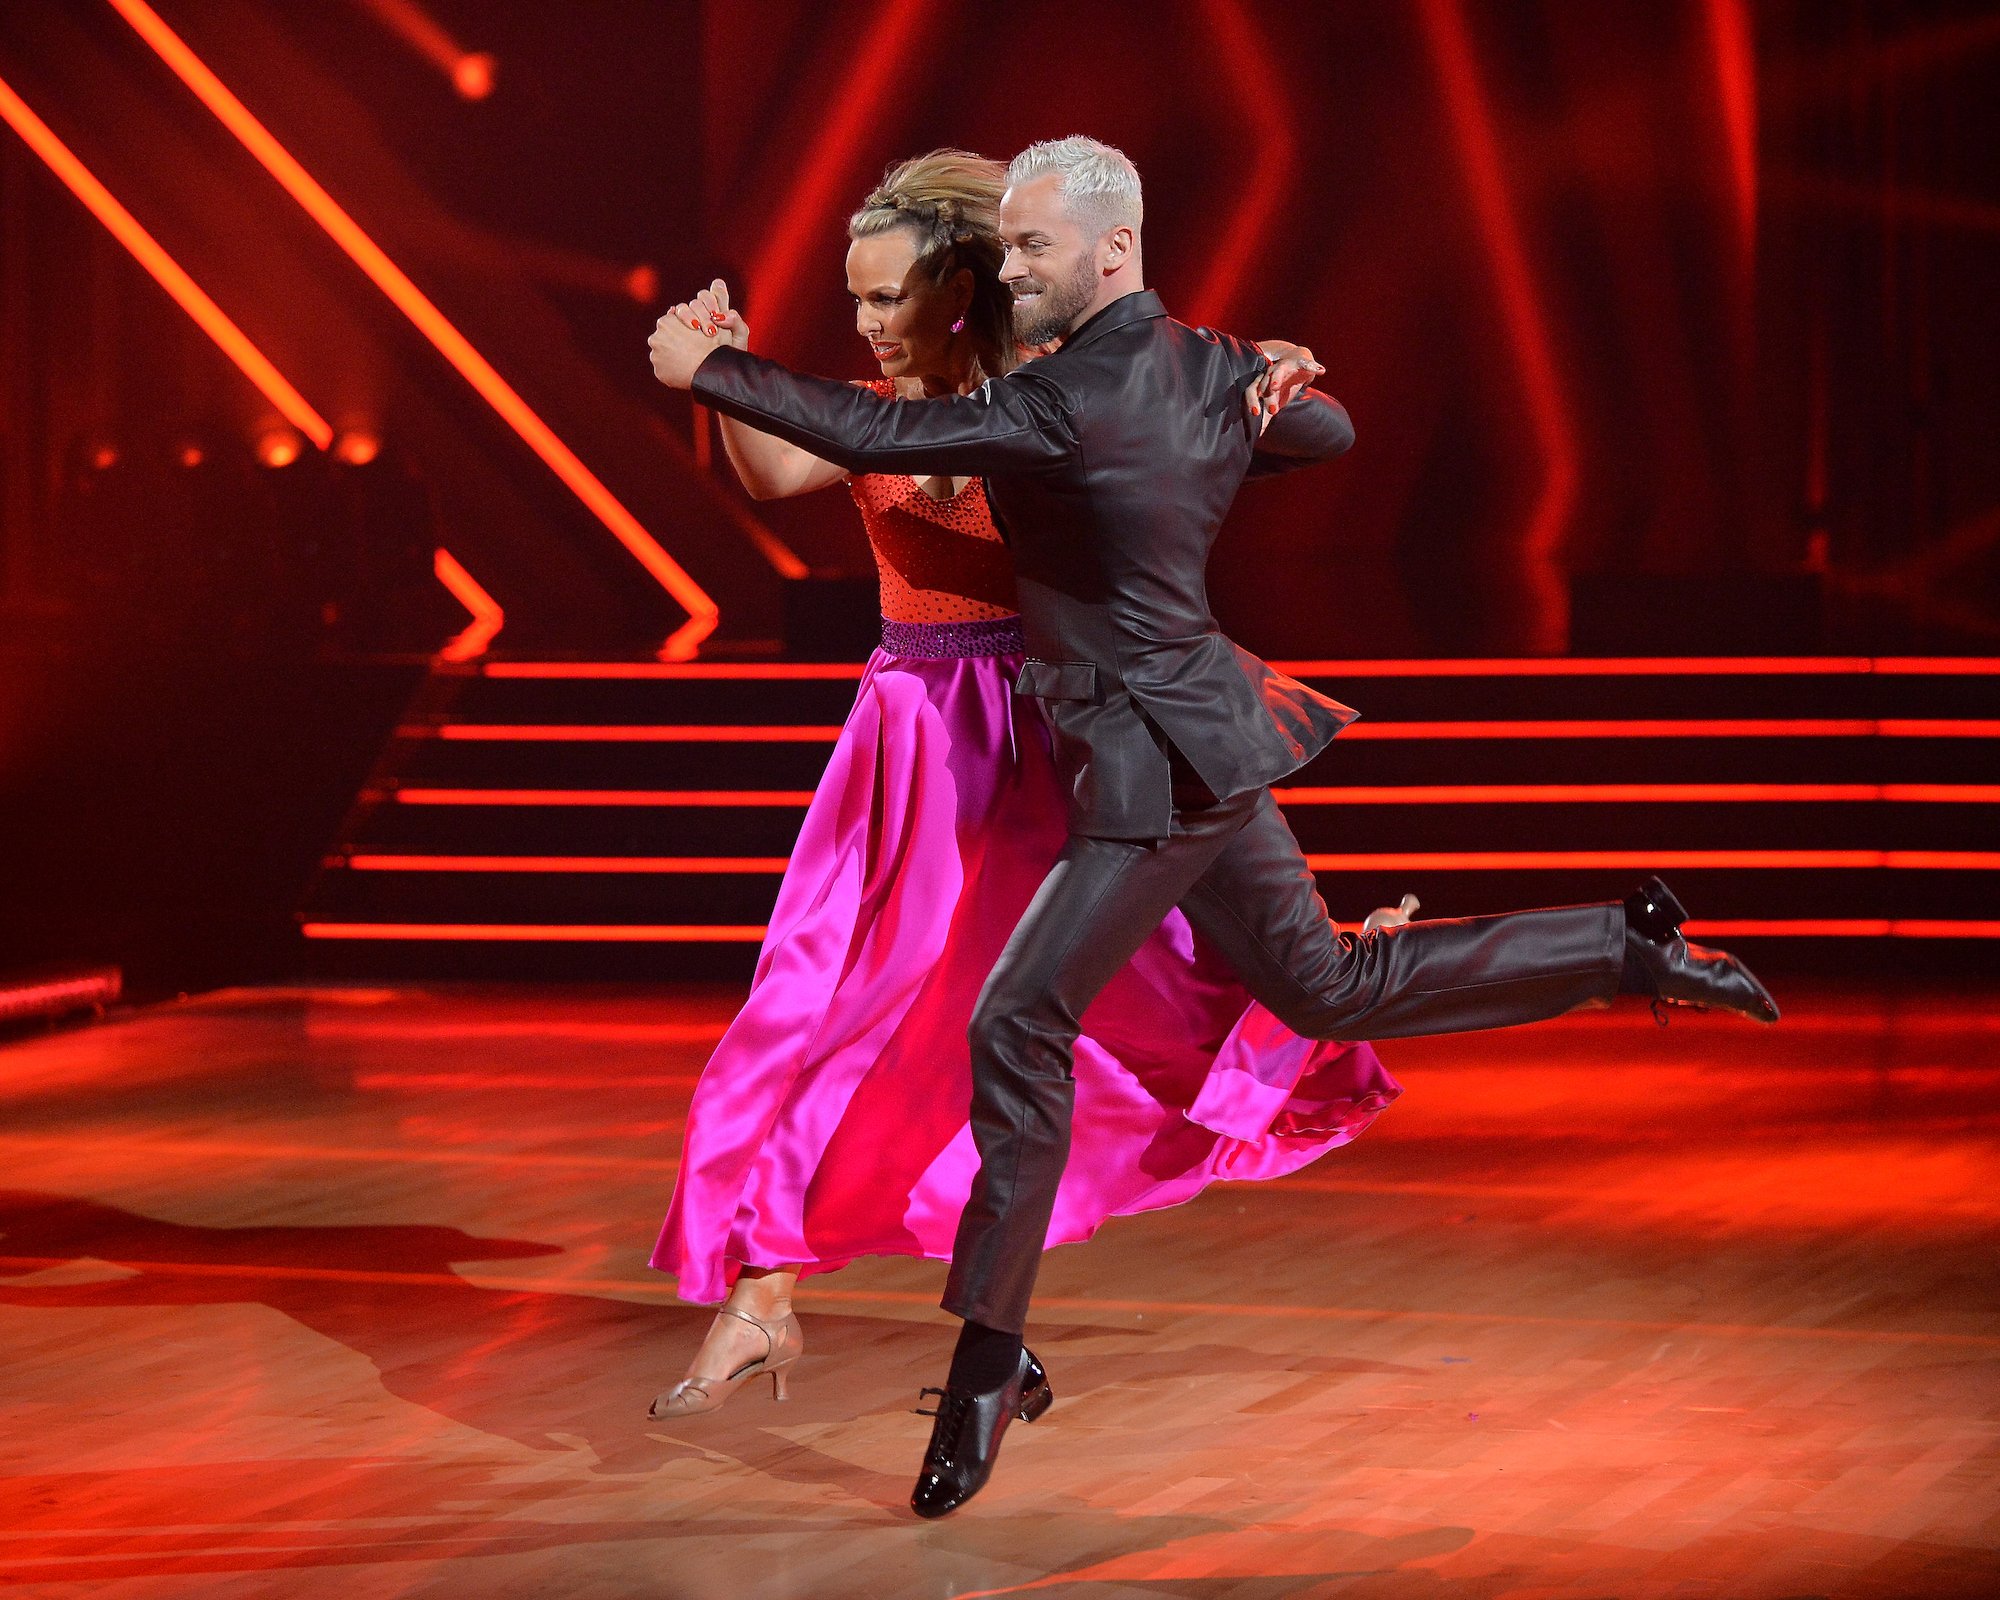 'Dancing with the Stars': Melora Hardin dances with Artem Chigvintsev